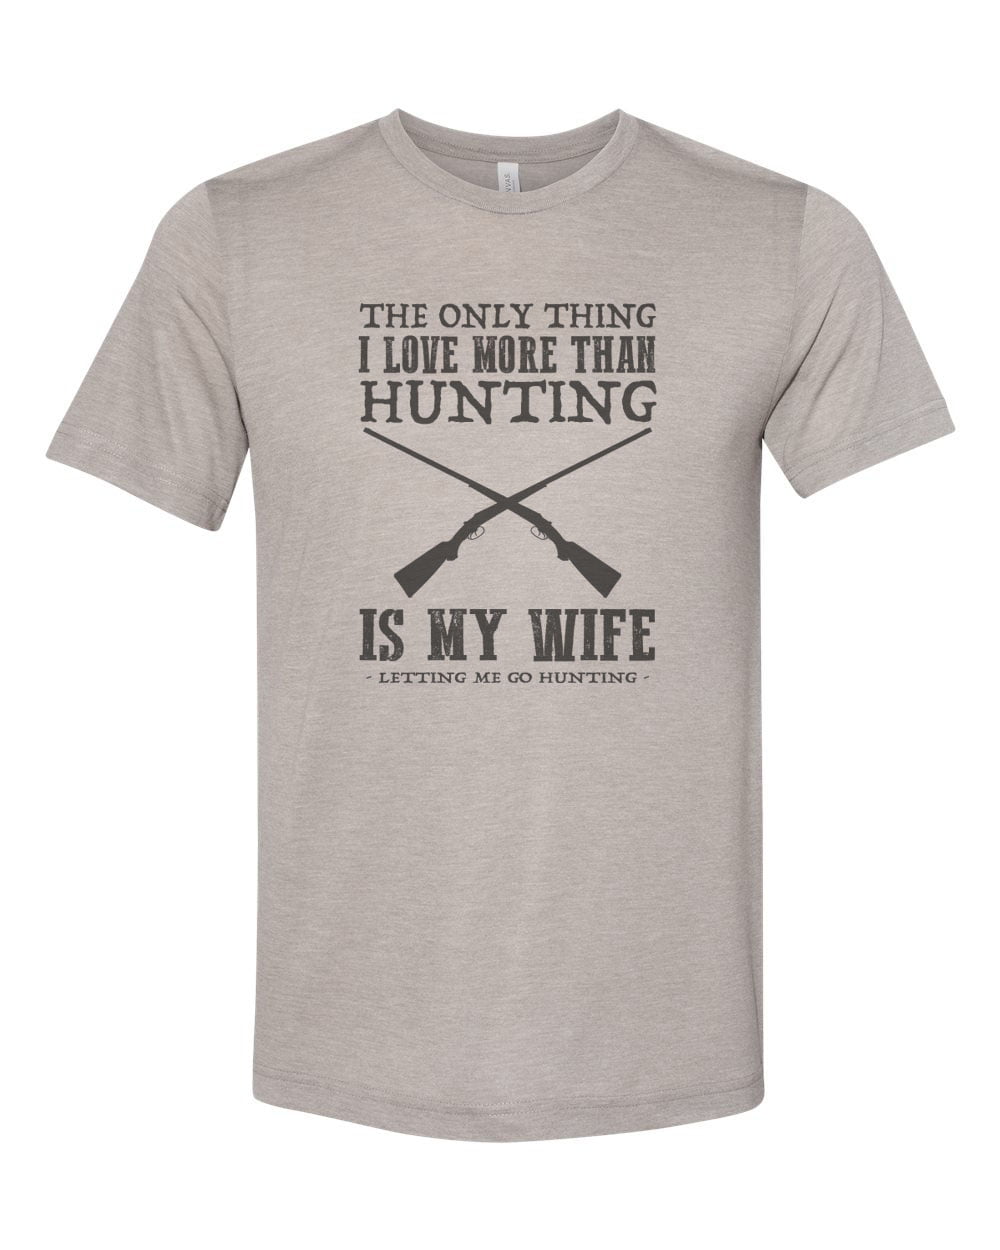 Hunting Shirt, The Only Thing I Love More Than Hunting, Husband Shirt, Gift  For Him, Hubby Tee, Hunting And Fishing, Hunting Dad, Guns, Deer, Heather  Stone, LARGE 